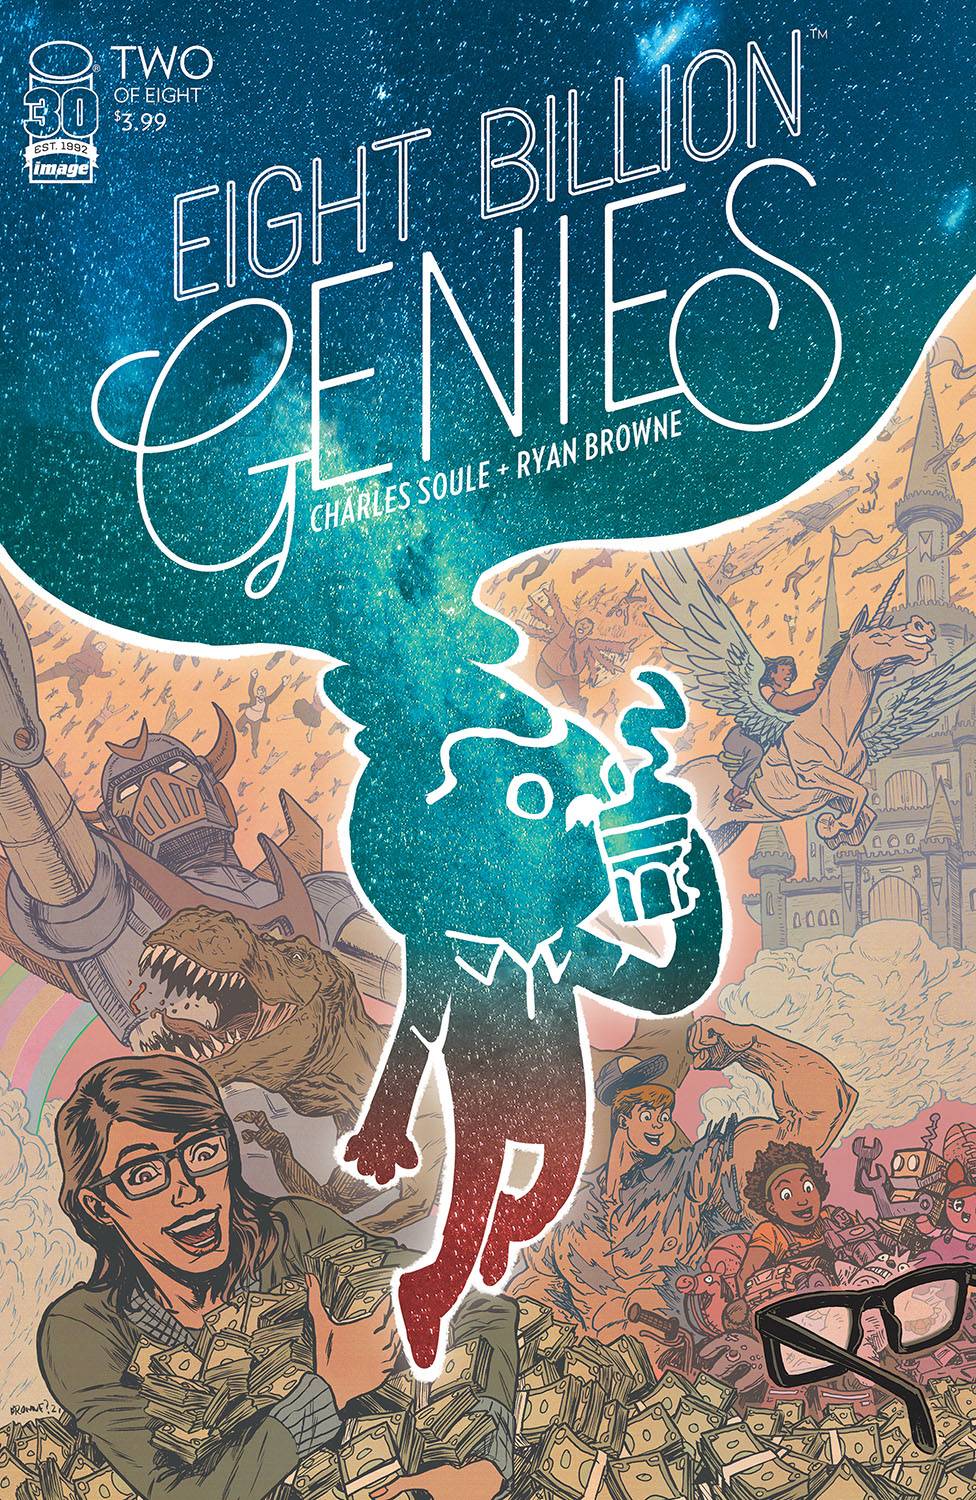 Eight Billion Genies #2 (Of 8) Cover A